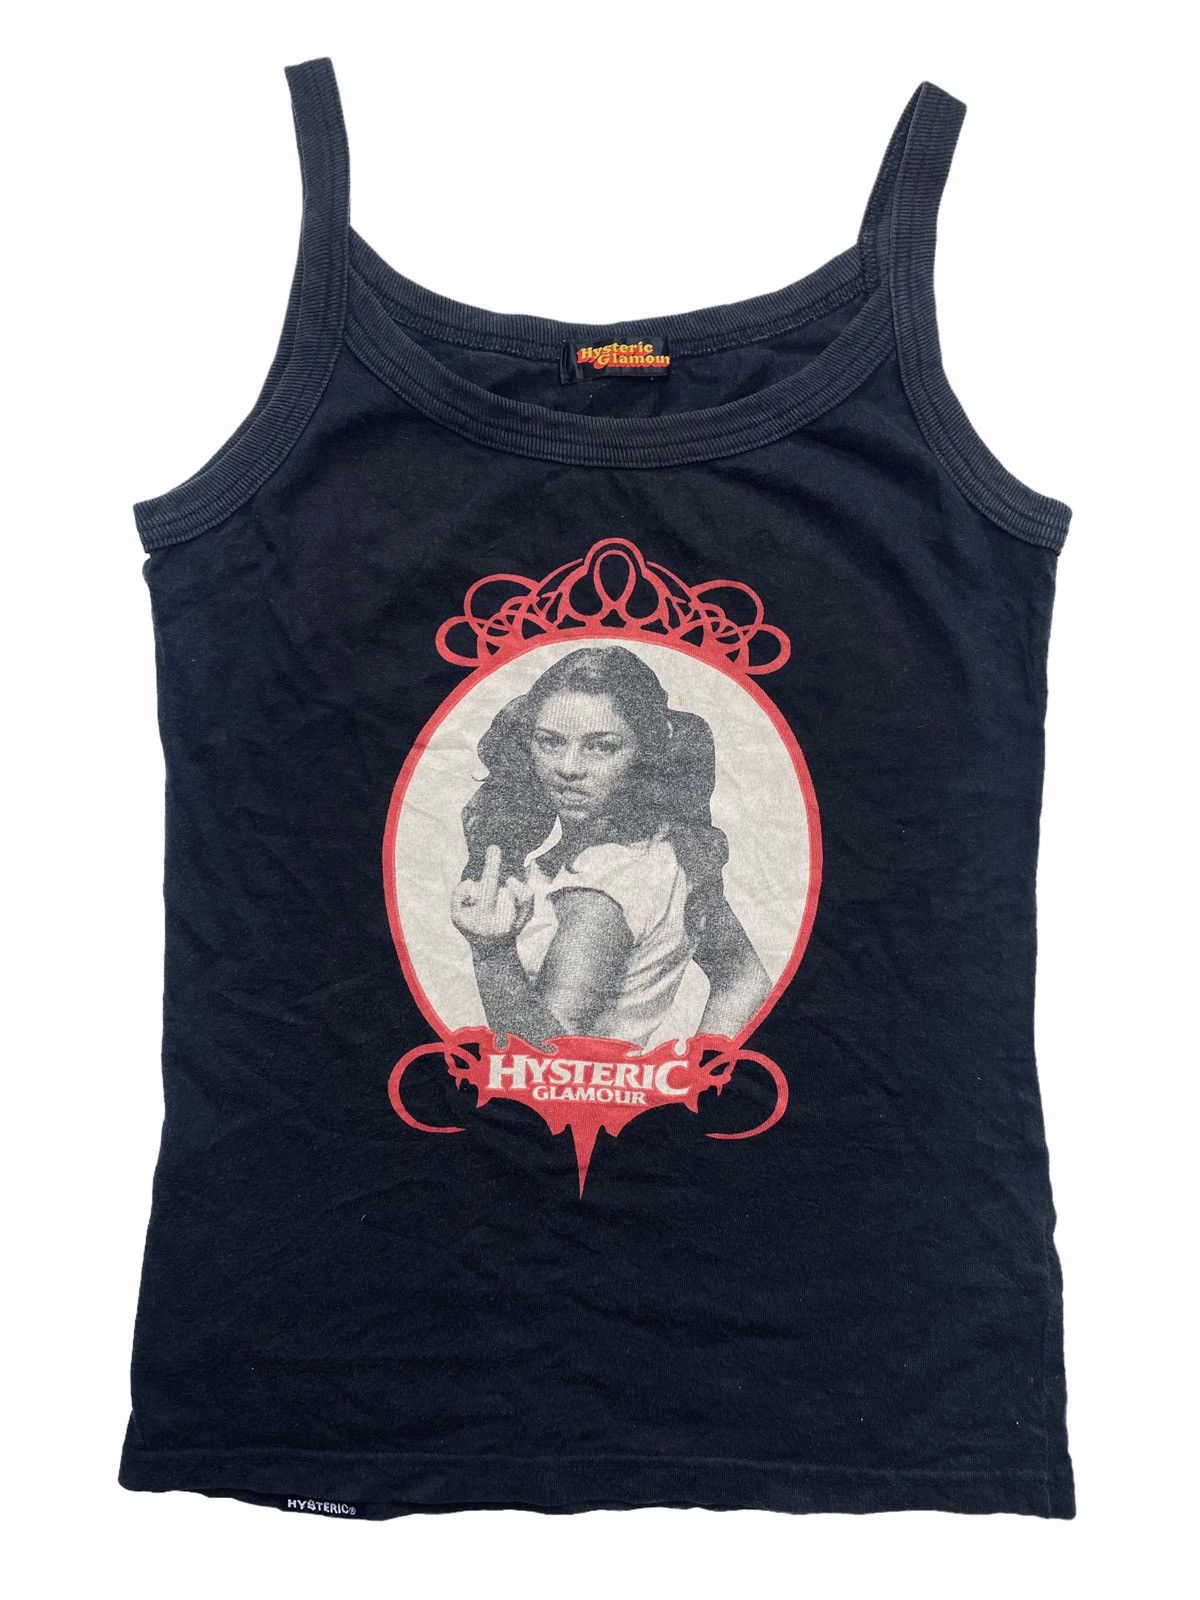 Hysteric Glamour 1990s Hysteric Glamour - Iconic Girl Fuck Tank 